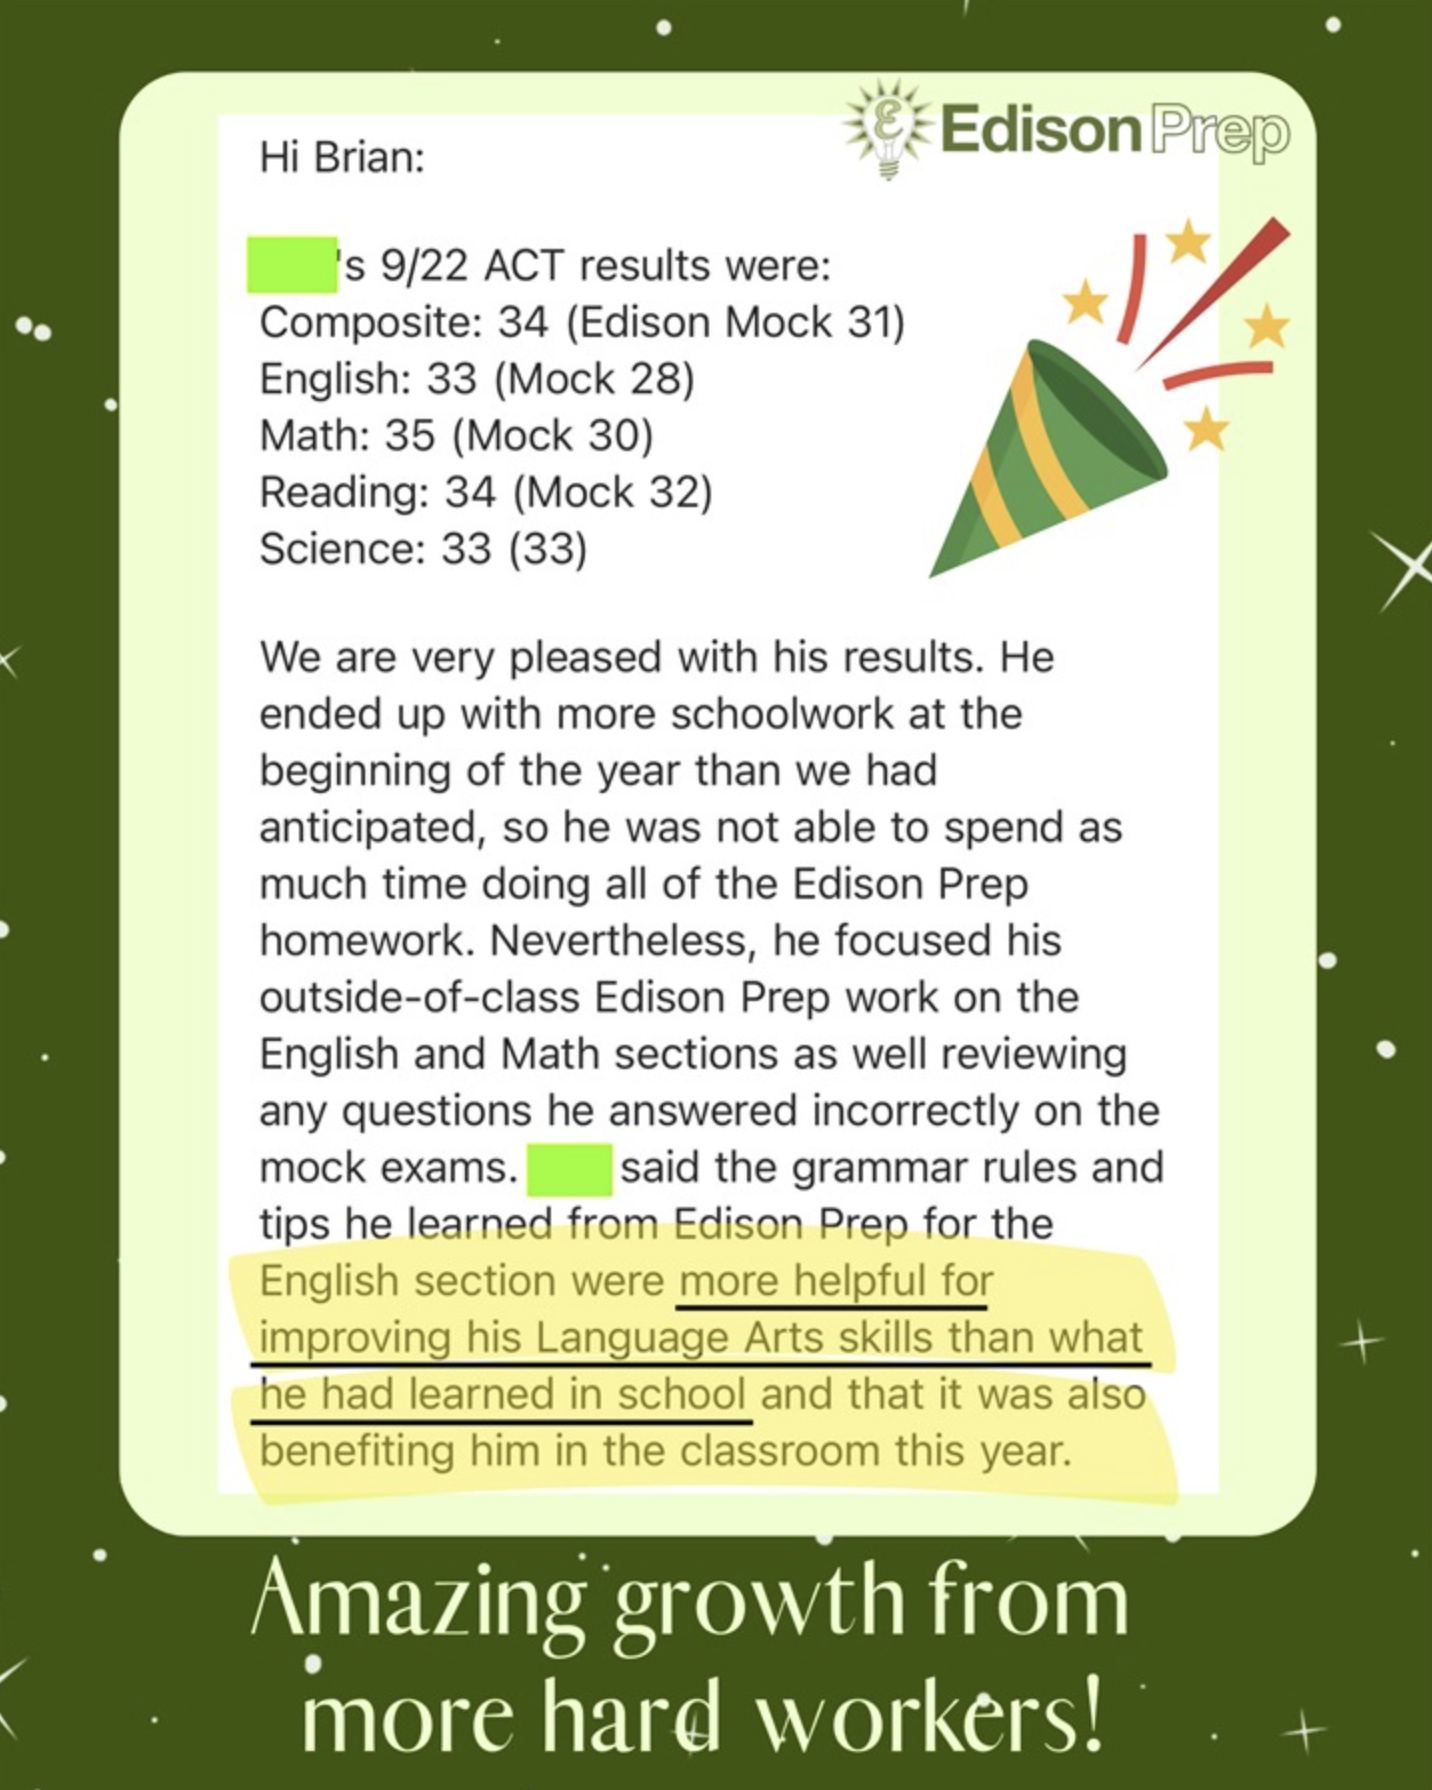 A testimonial graphic with a message to Brian from Edison Prep, detailing a student's impressive ACT scores, including a composite of 34, which improved from a mock score of 31. Individual scores are highlighted, showing increases in English, Math, and Reading. The parent expresses satisfaction, noting the student's diligent work on Edison Prep's outside-of-class assignments and how the preparation not only improved test scores but also language arts skills in the classroom. The bottom of the graphic is adorned with the phrase 'Amazing growth from more hard workers!' against a green watercolor backdrop.